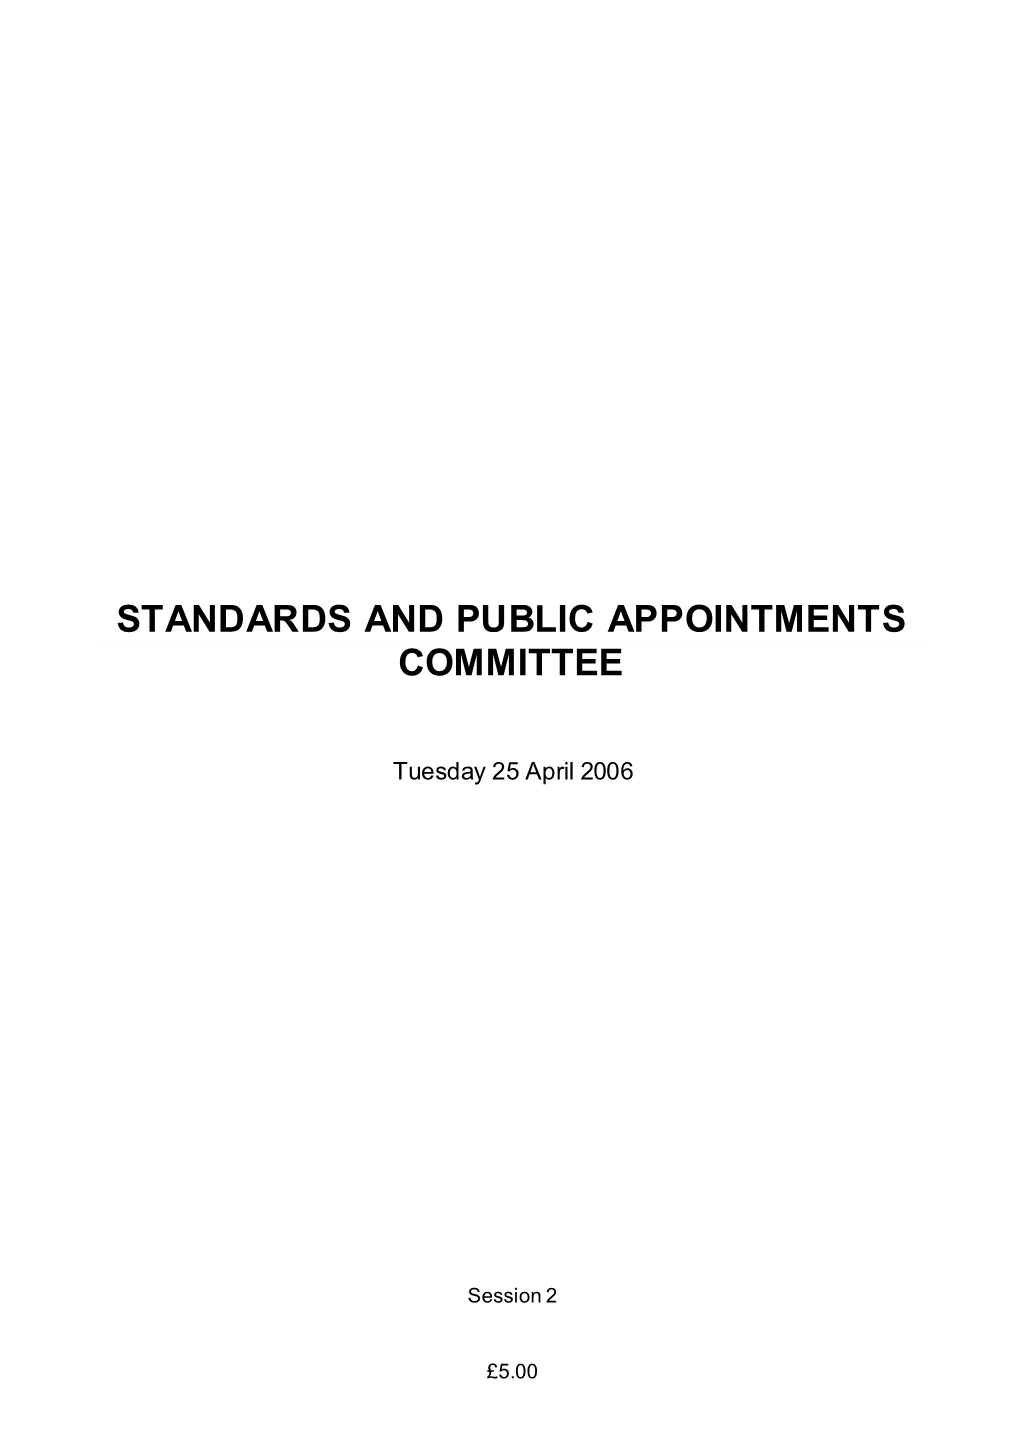 Standards and Public Appointments Committee